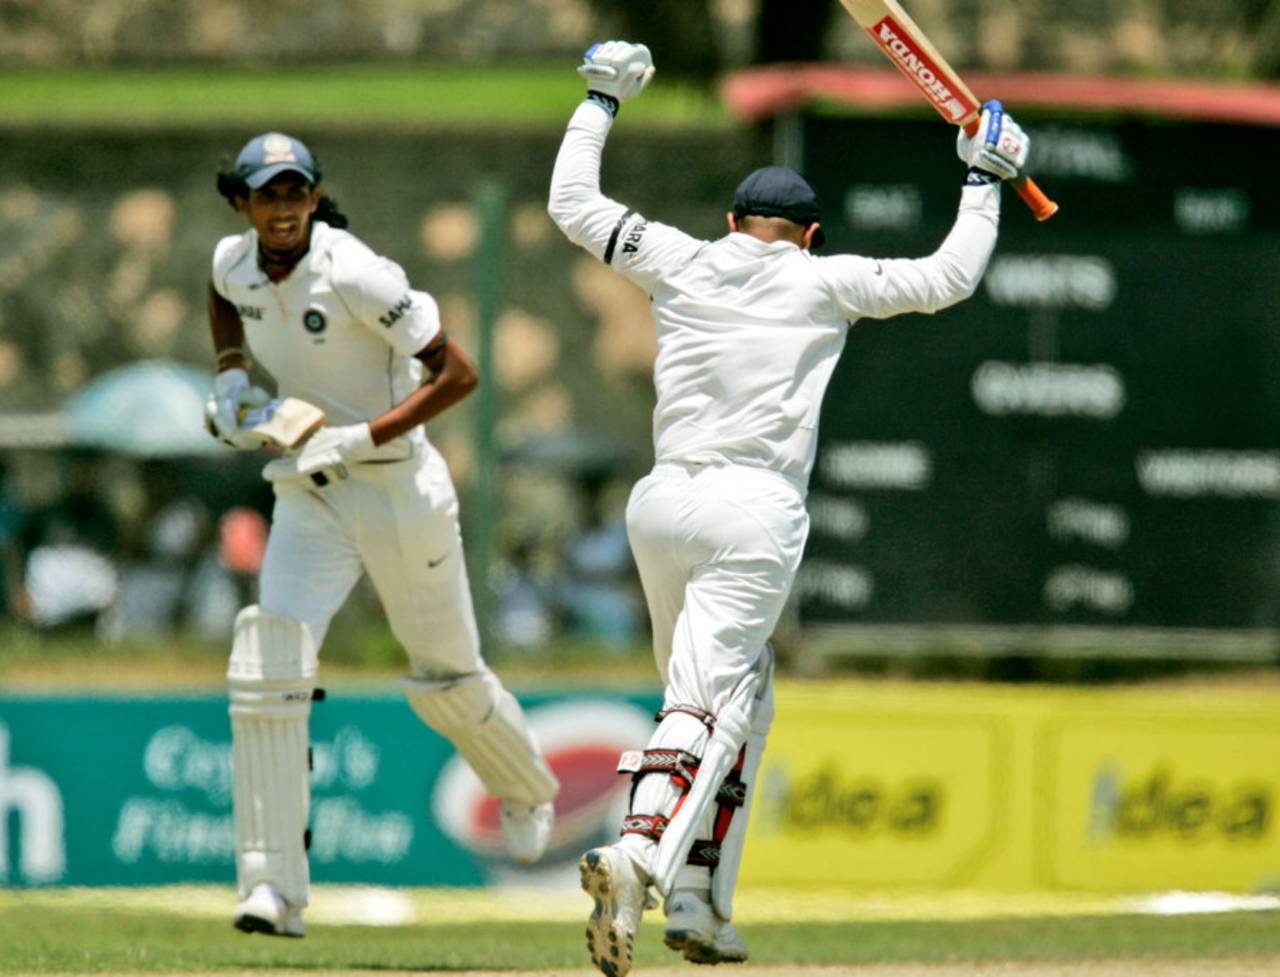 Virender Sehwag reaches his fifth Test double-hundred, Sri Lanka v India, 2nd Test, Galle, 2nd day, August 1, 2008